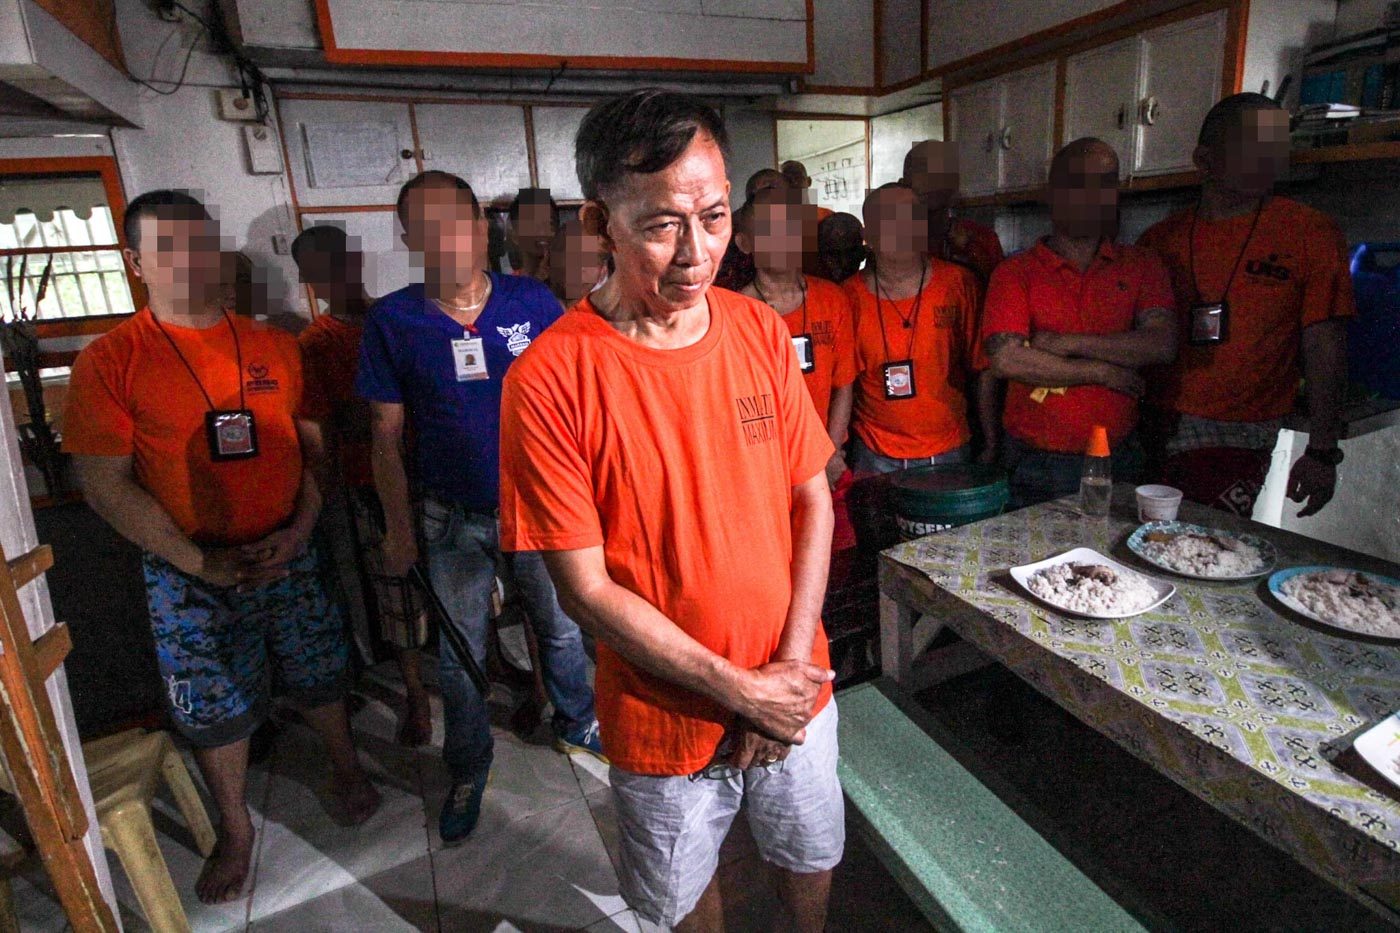 'THE BUTCHER' IN BILIBID. Retired Major General Jovito Palparan stays in a crowded quarantine jail facility inside the New Bilibid Prison in Muntinlupa City on October 4, 2018. Photo by Lito Borras/Rappler  